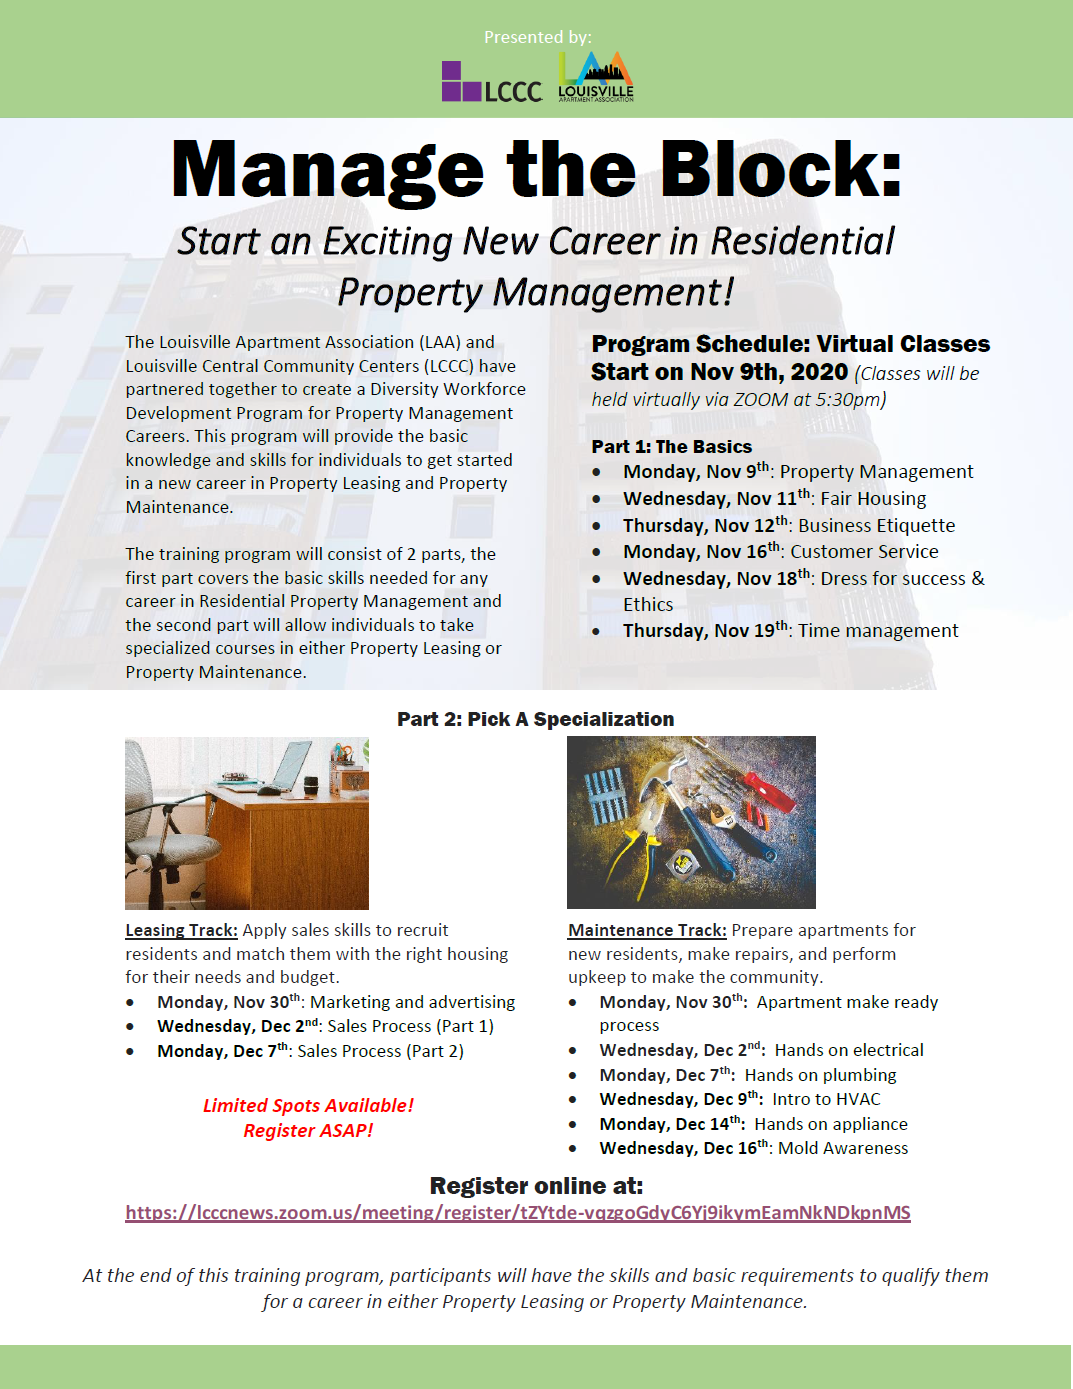 LAA & LCCC Presents Manage the Block